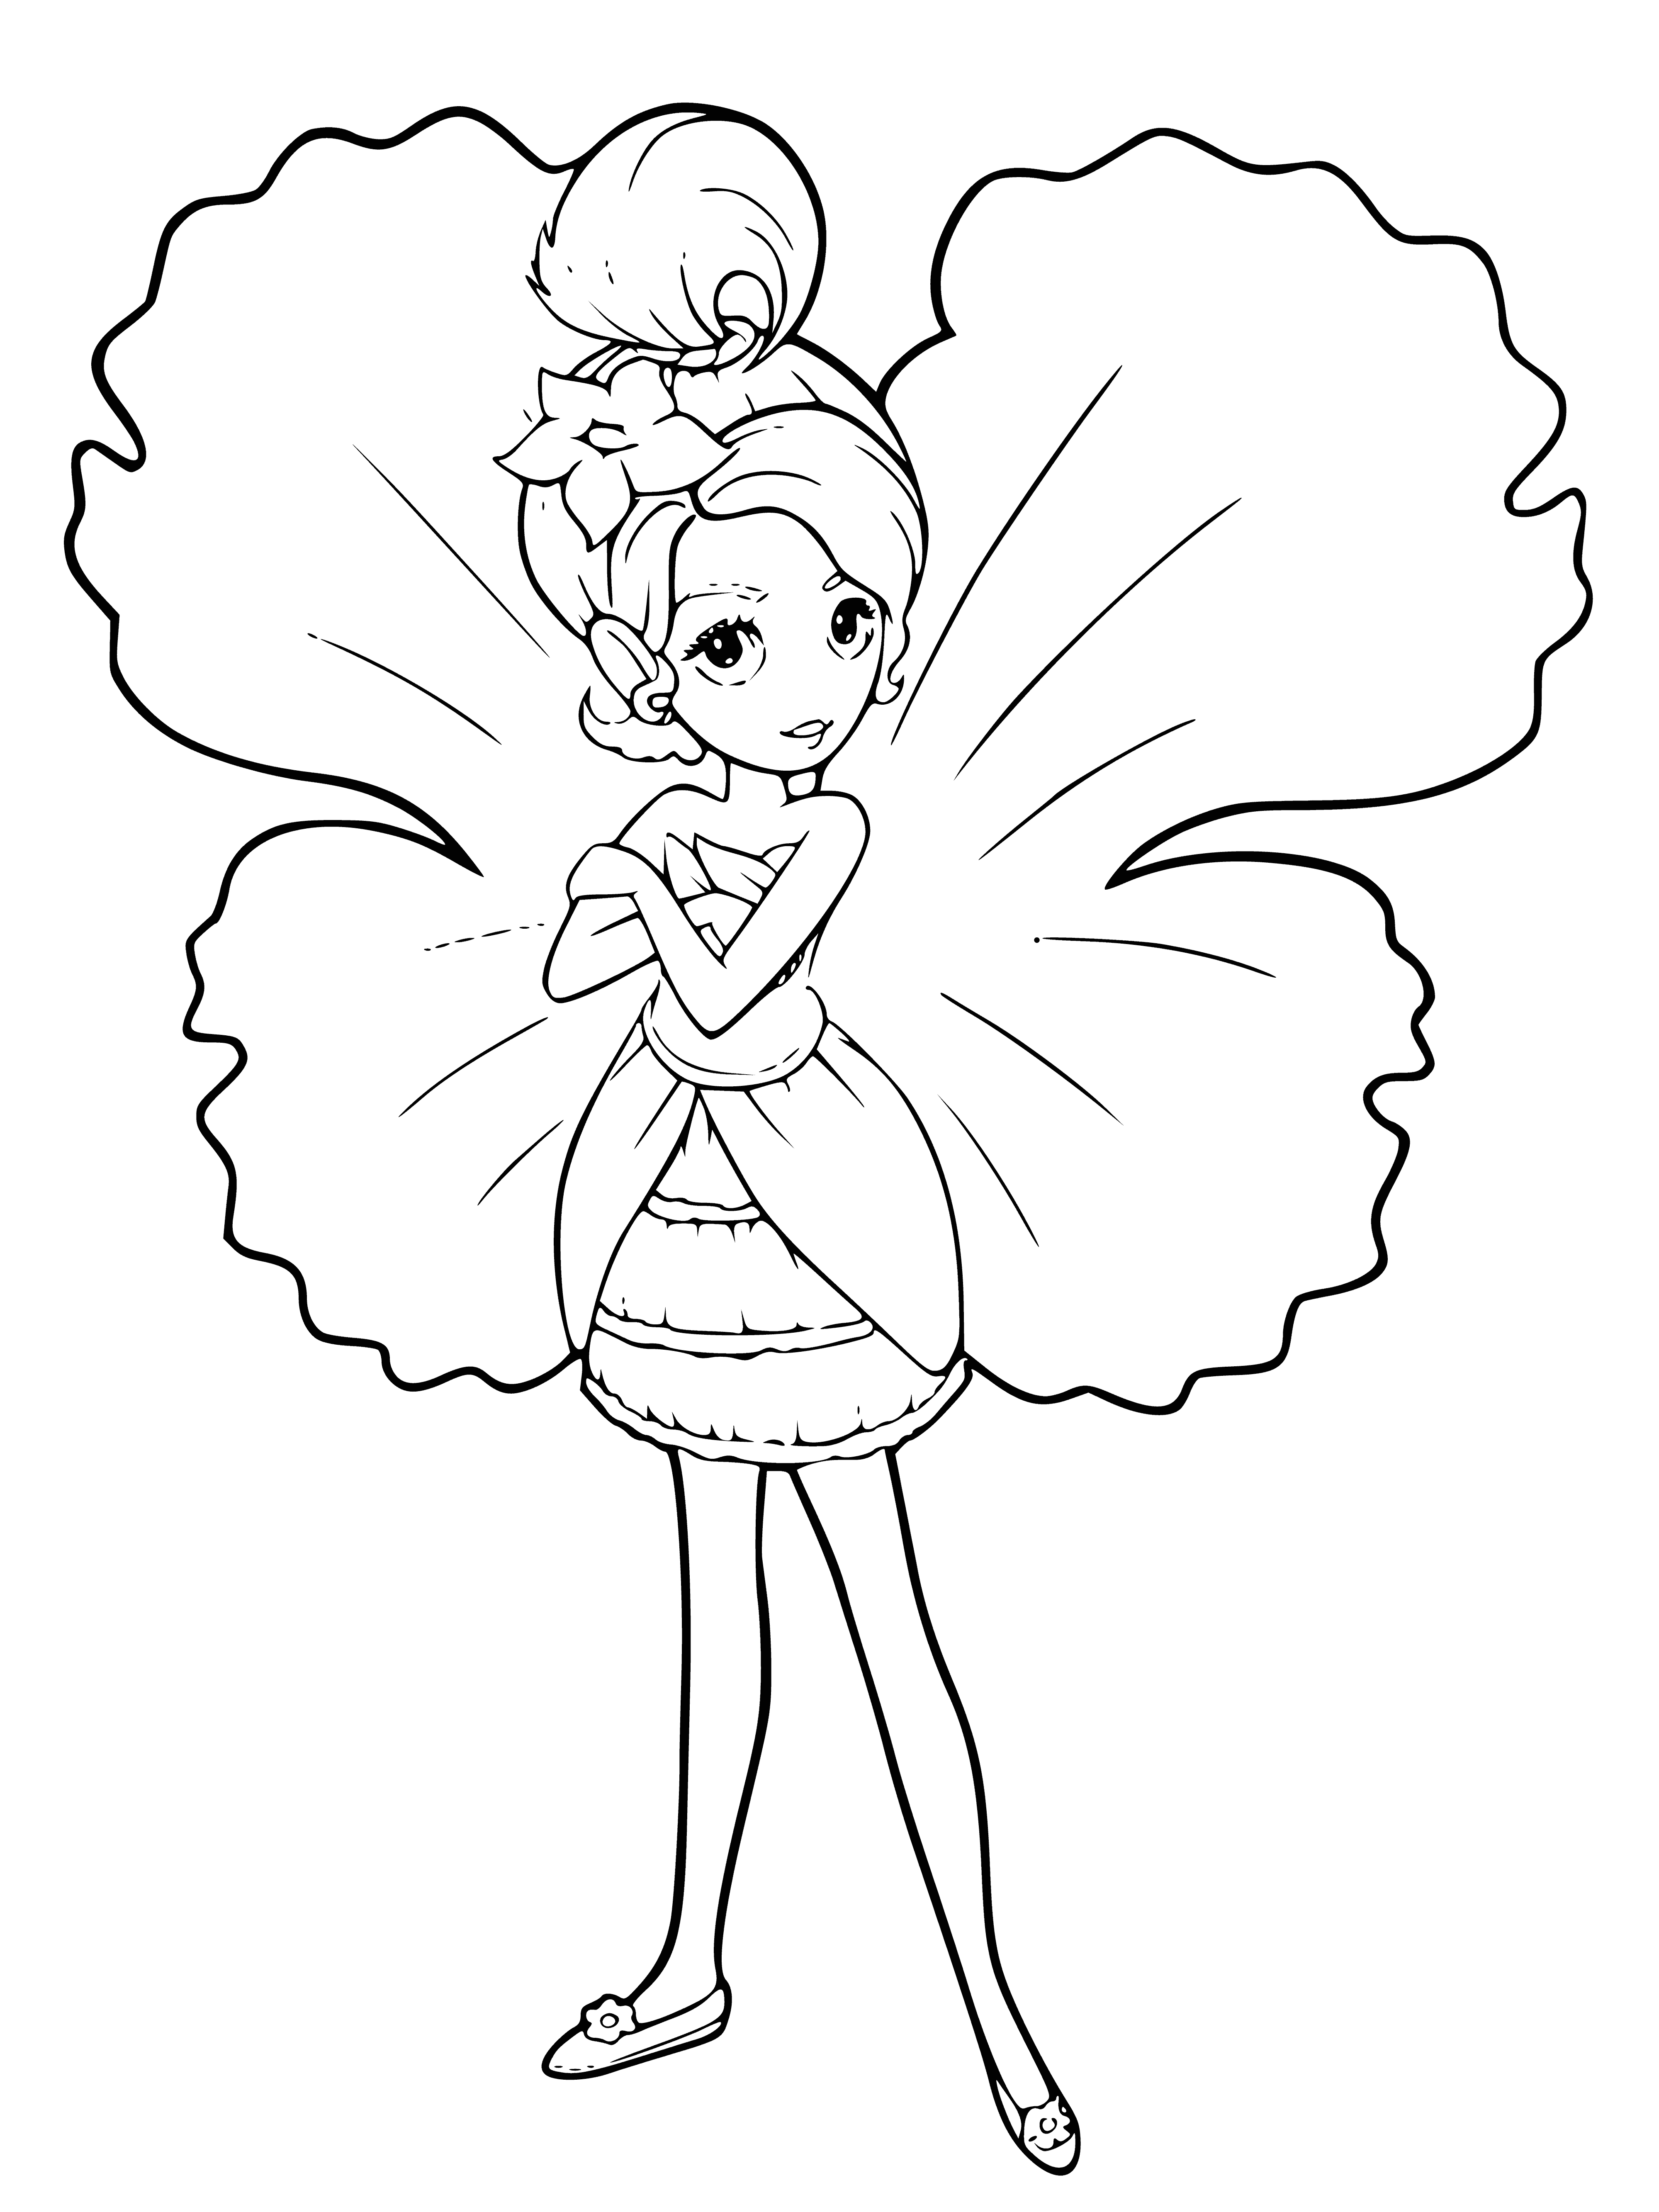 coloring page: Two elves & a fairy holding hands in green clothes, pointy shoes & ears. Fairy has wings & is wearing a dress. #FairyTale